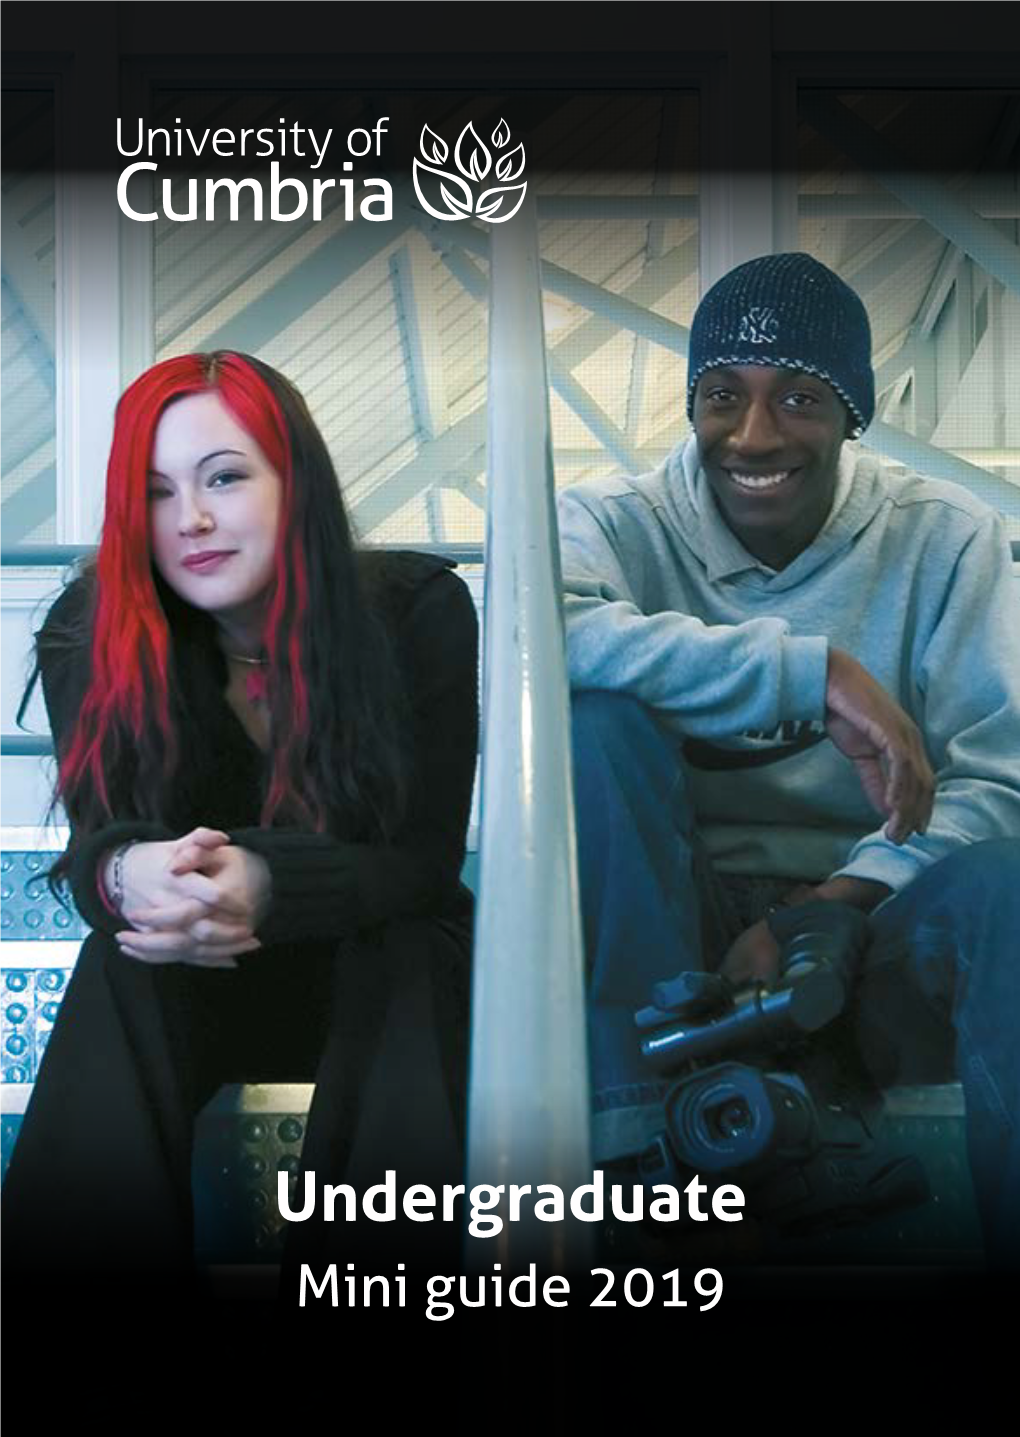 Undergraduate Mini Guide 2019 Coming to University Has Changed My Life